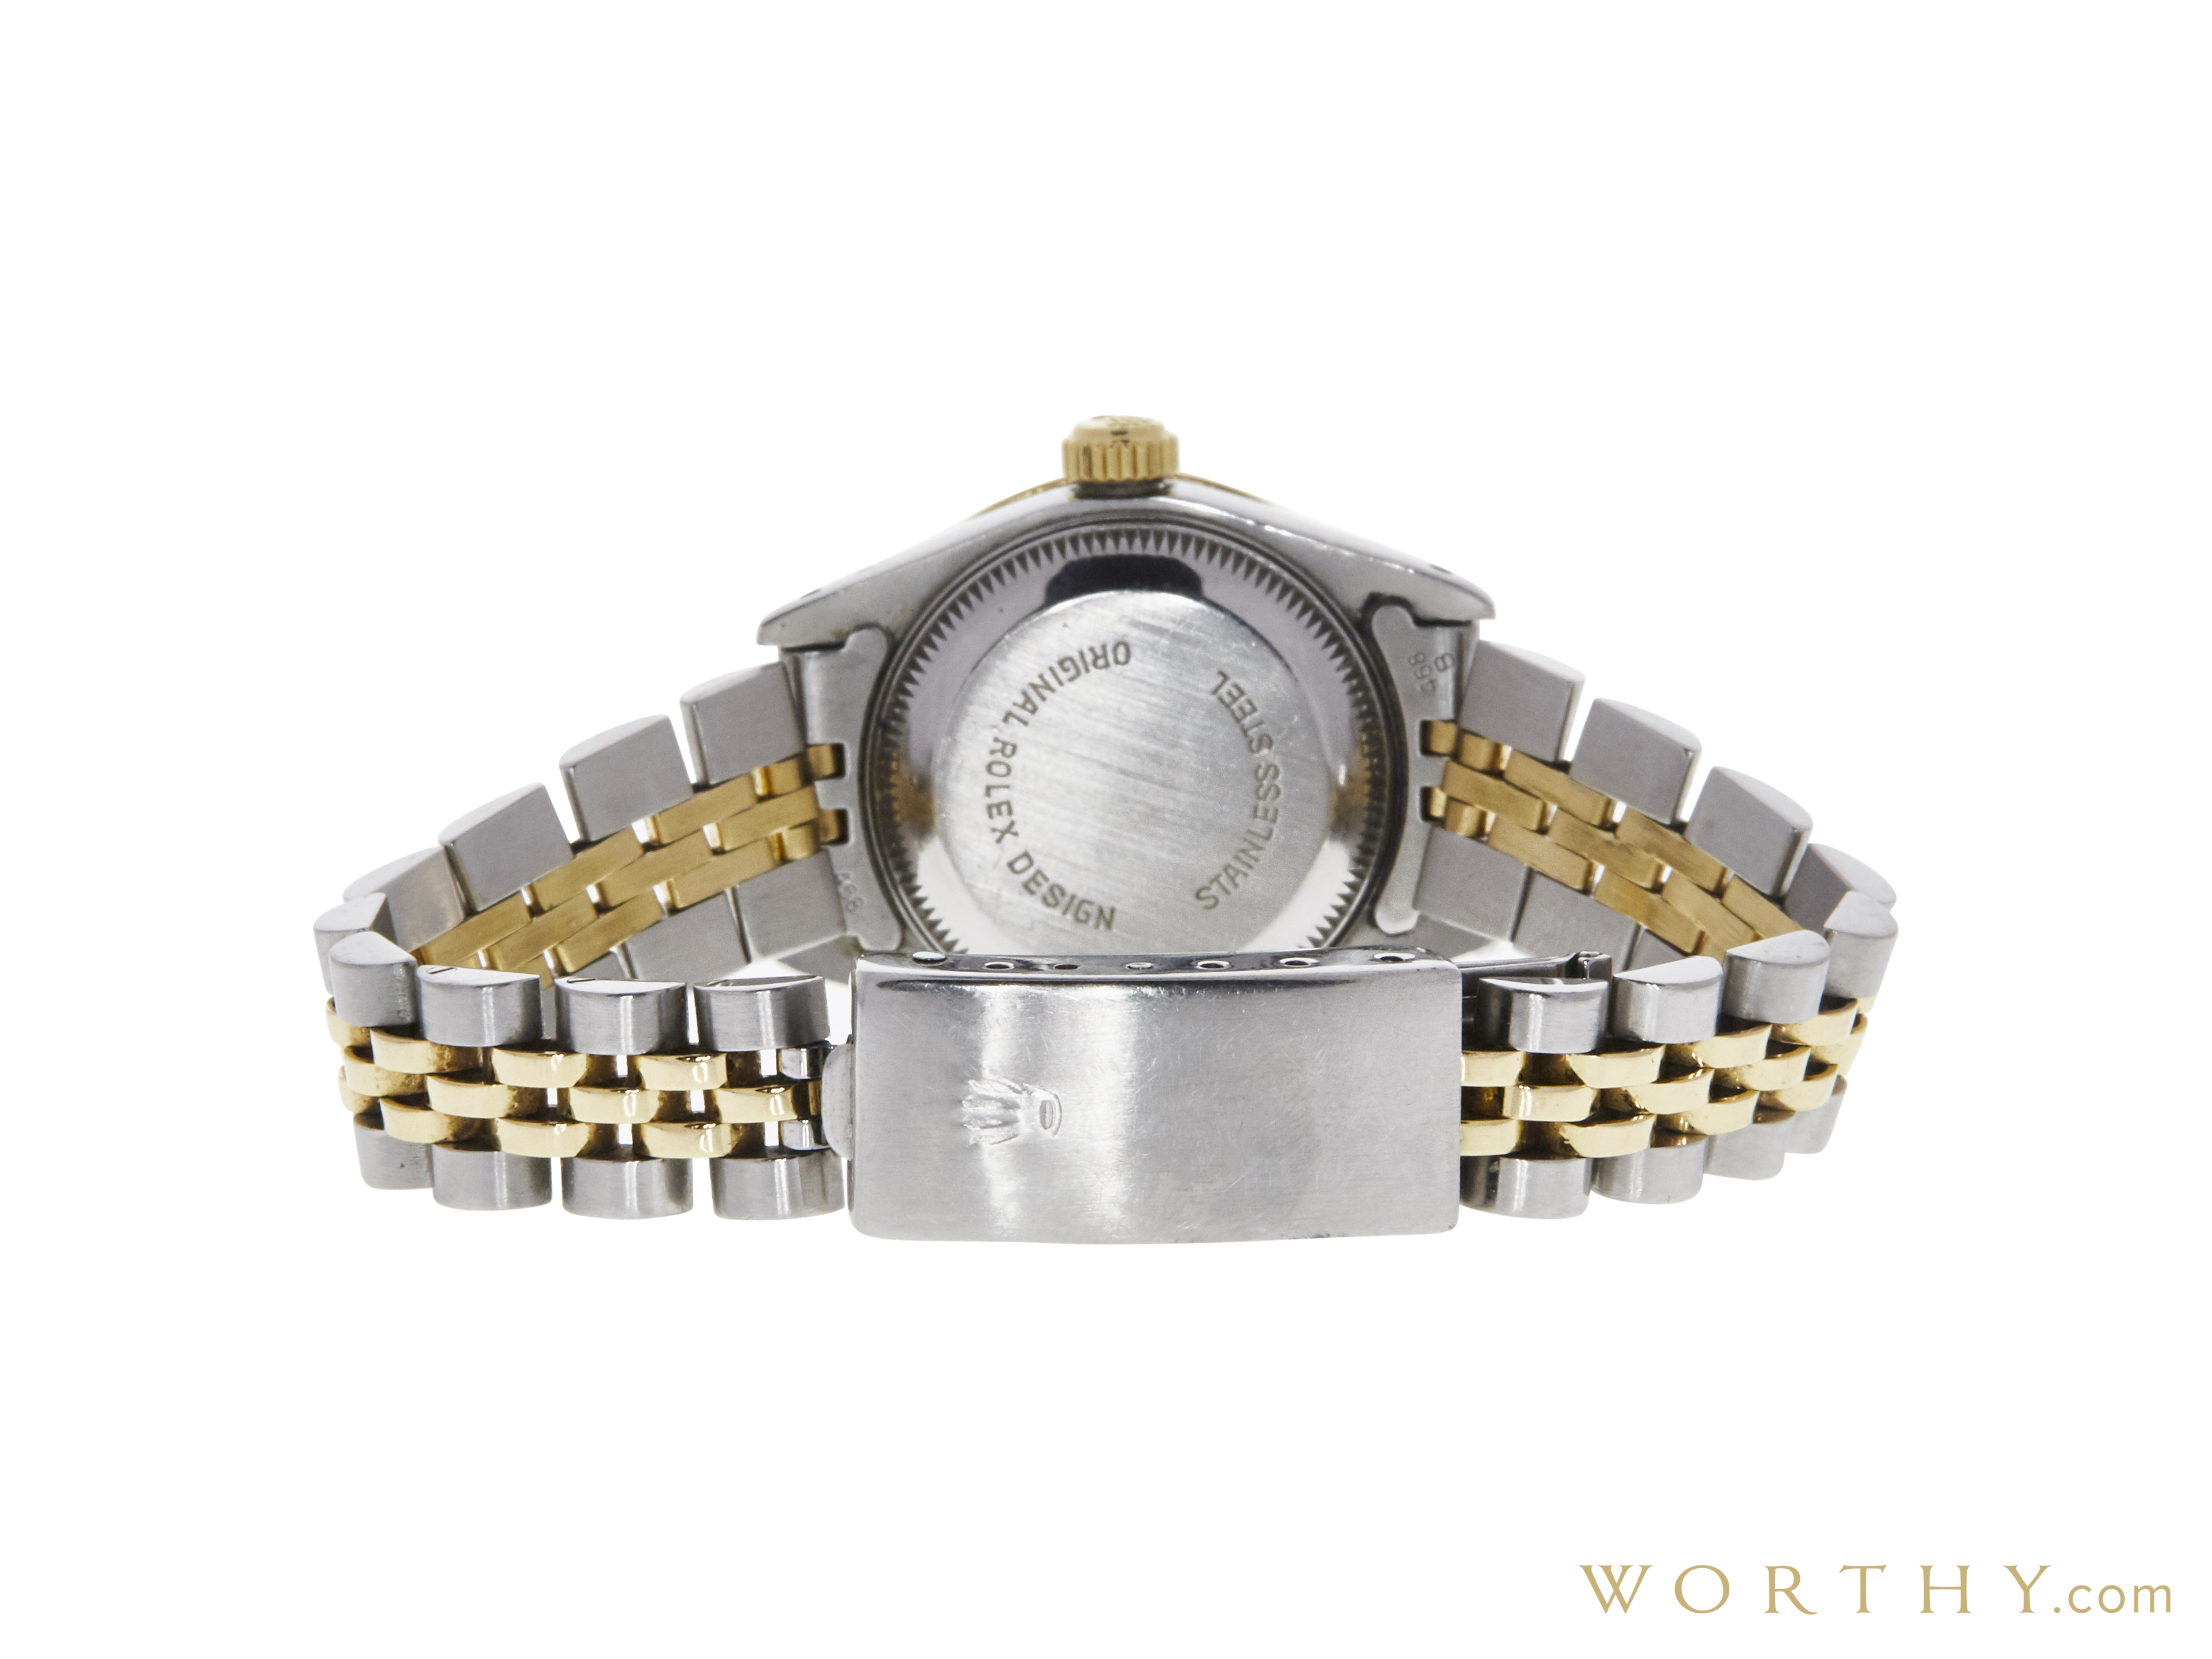 Watch Rolex 69173 Datejust L273247 | Sold For $1,325 | Worthy